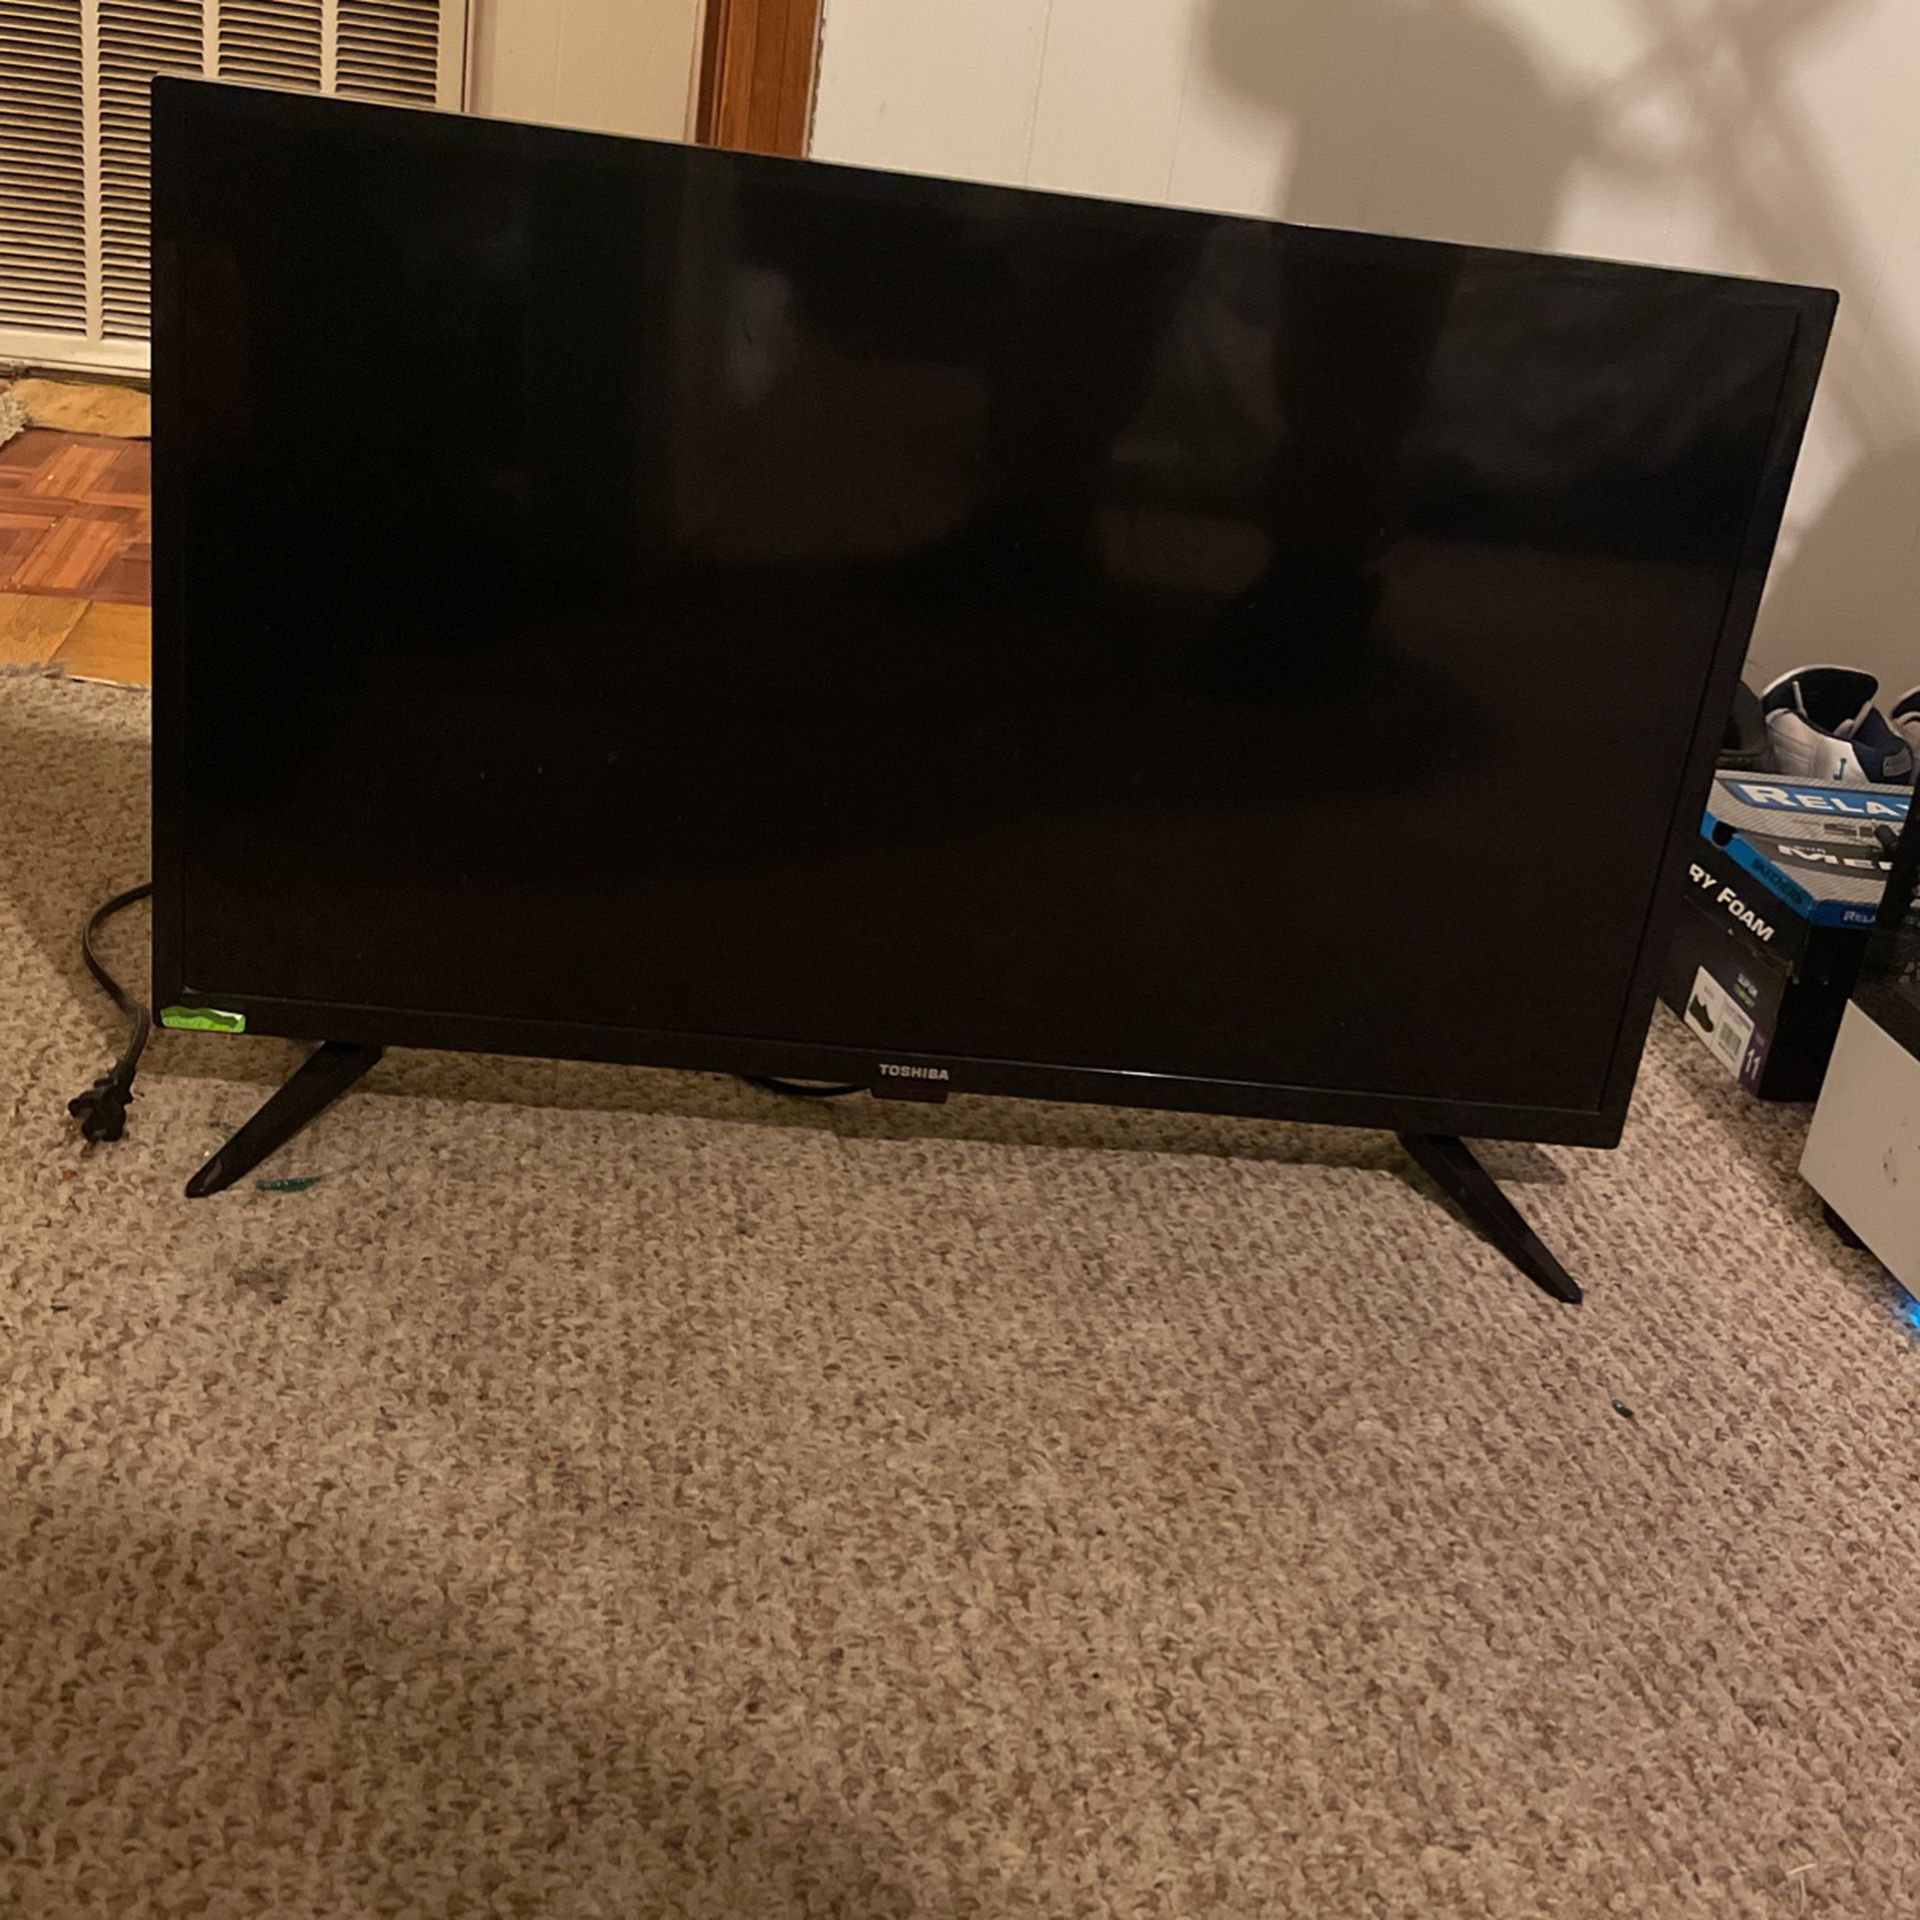 1080p Toshiba Tv FOR SALE